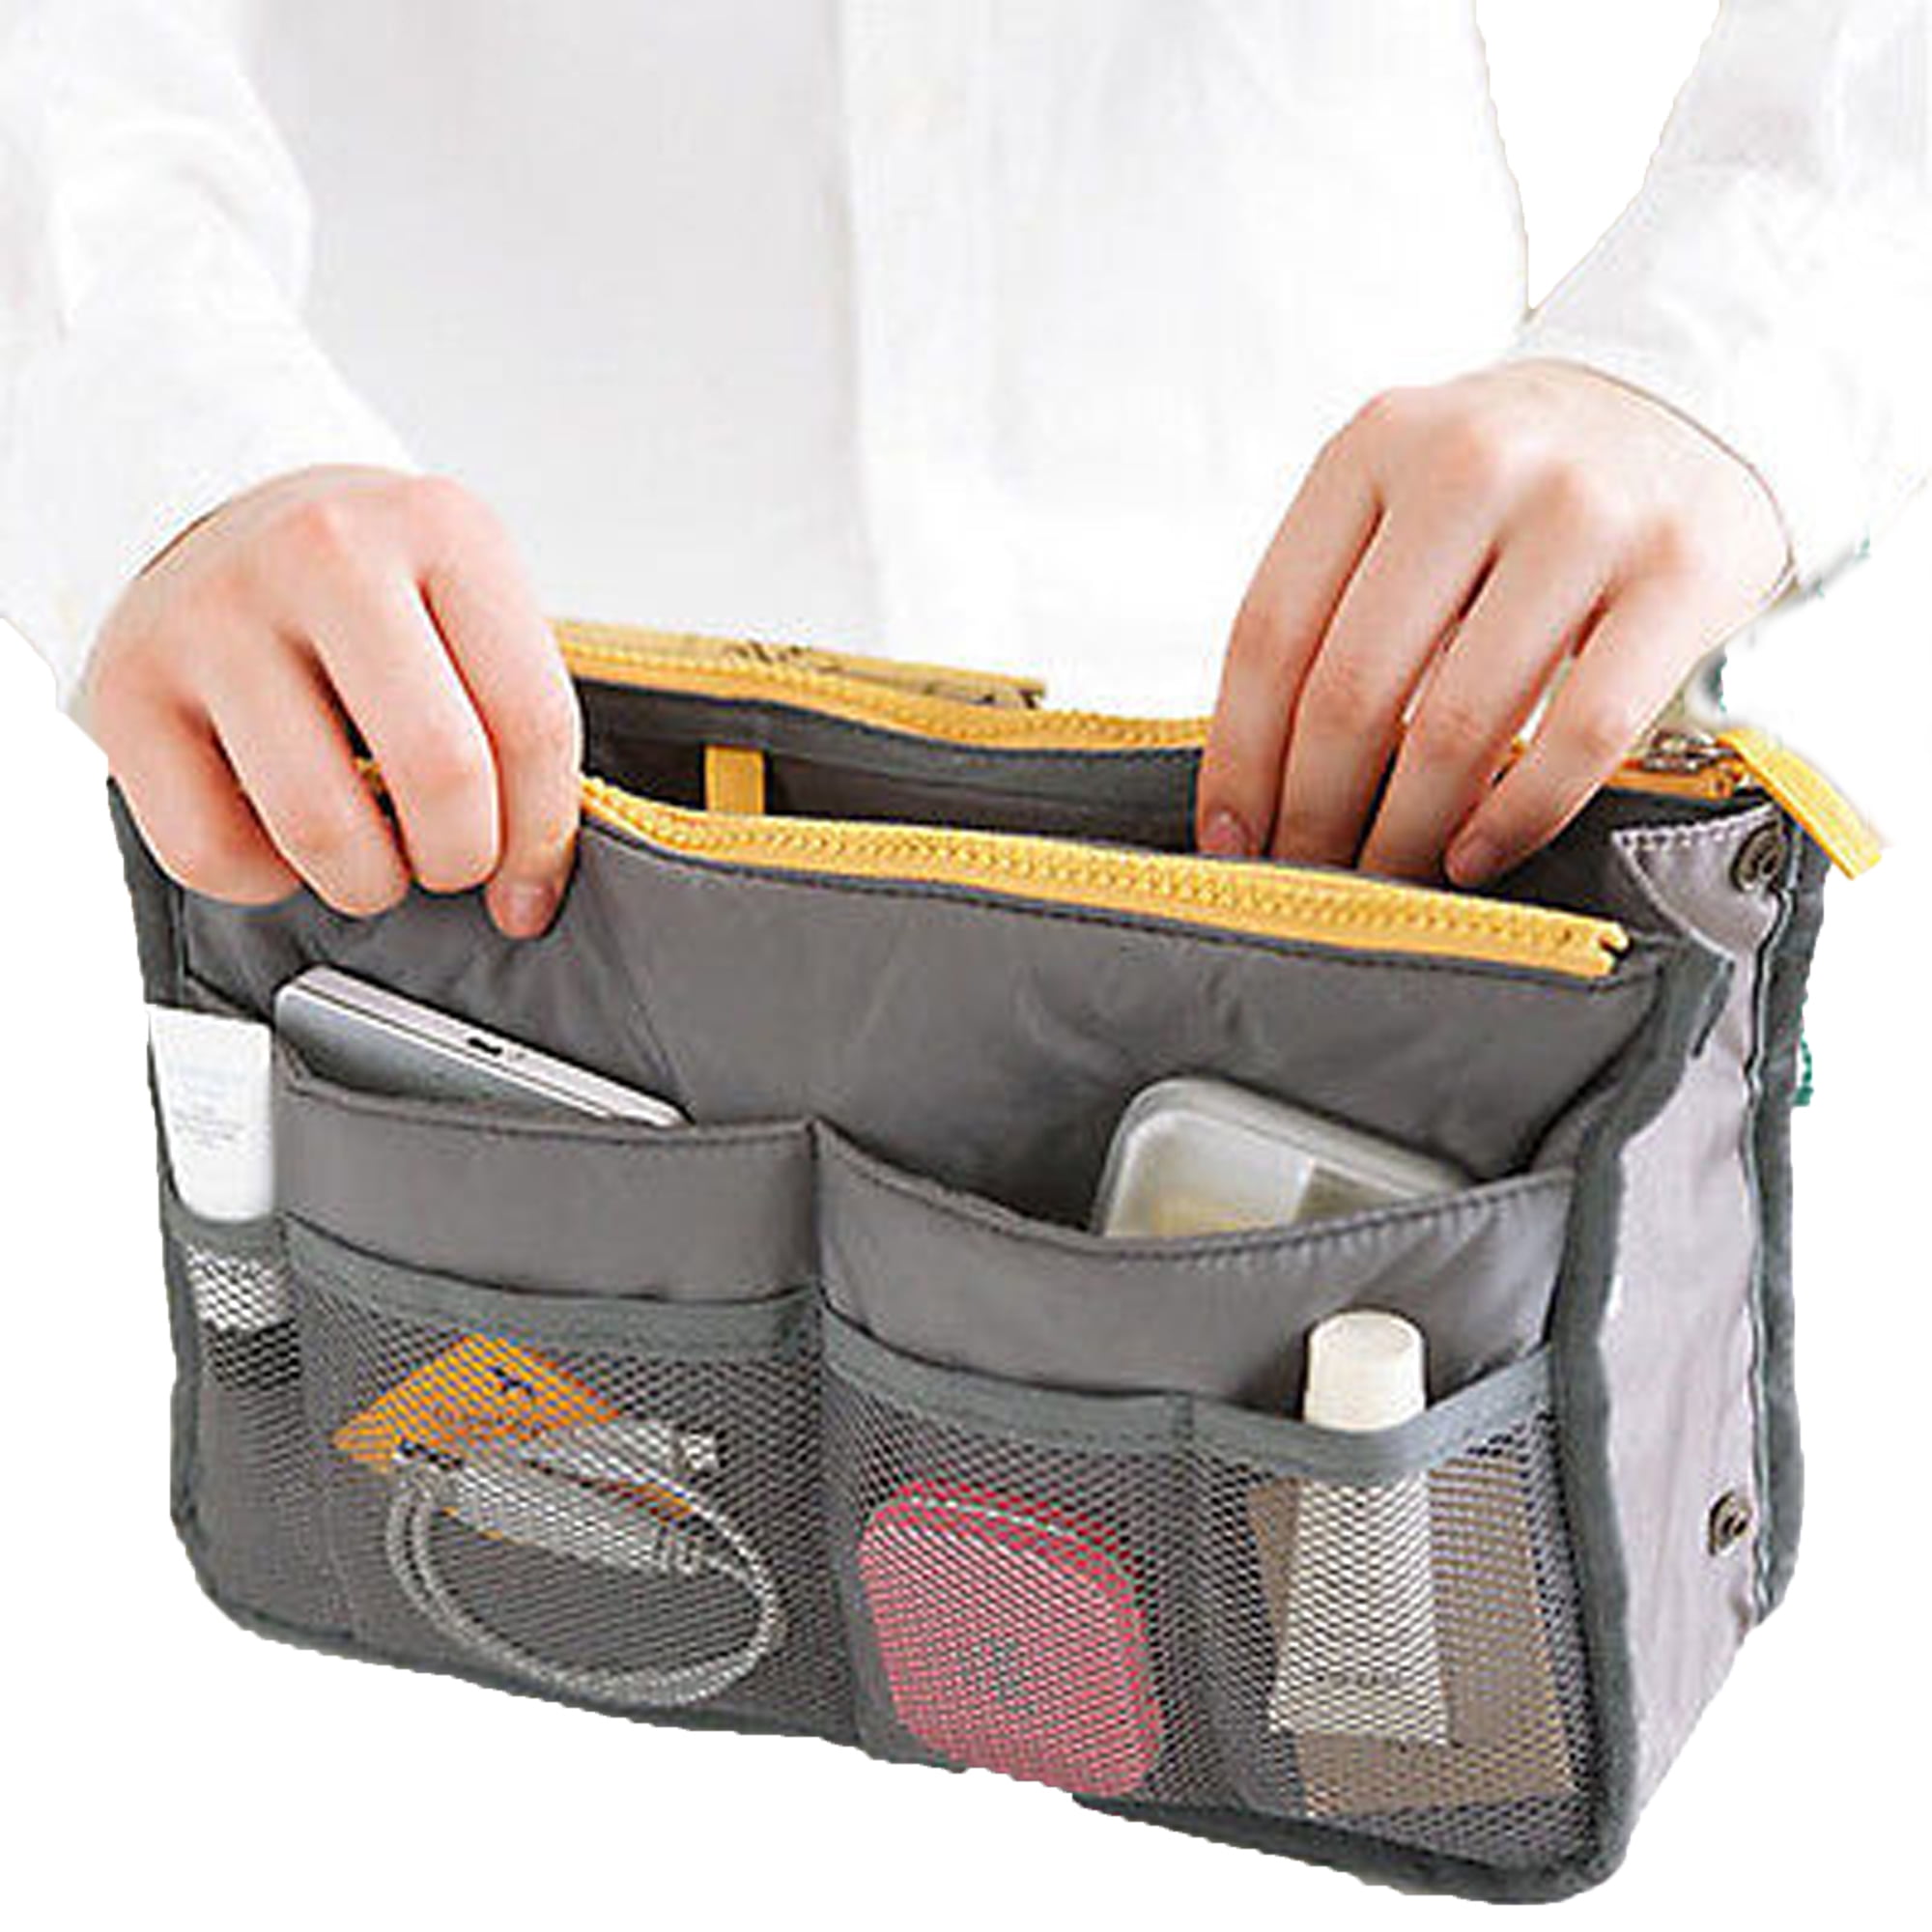 Women Organiser Travel Storage Bags Insert Liner Purse Large Tidy Pouch S0M7 